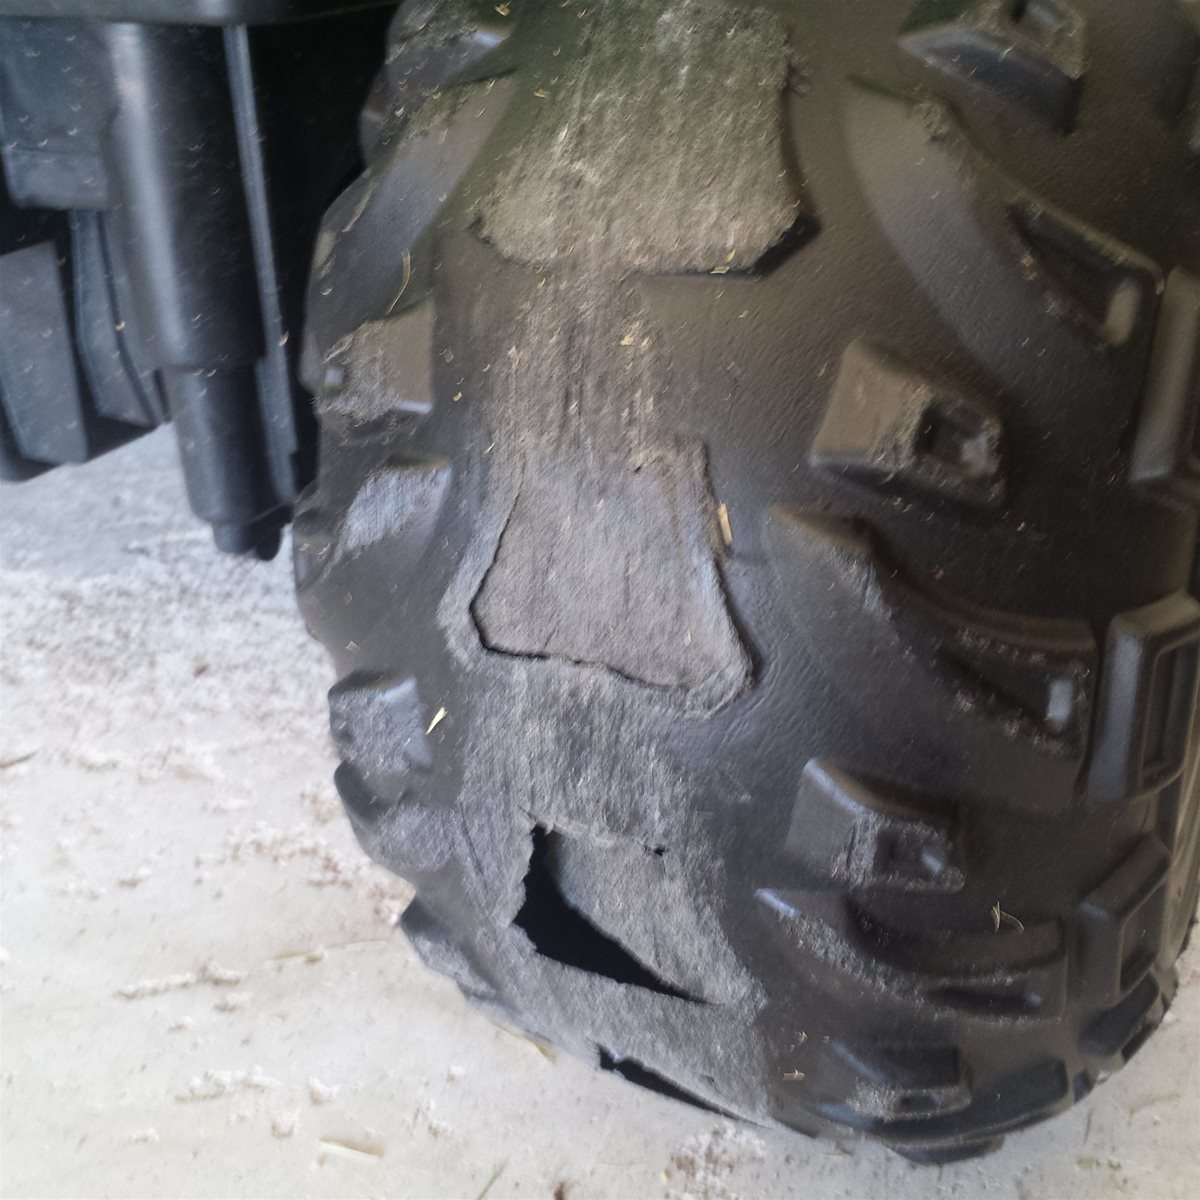 rubber tires on power wheels